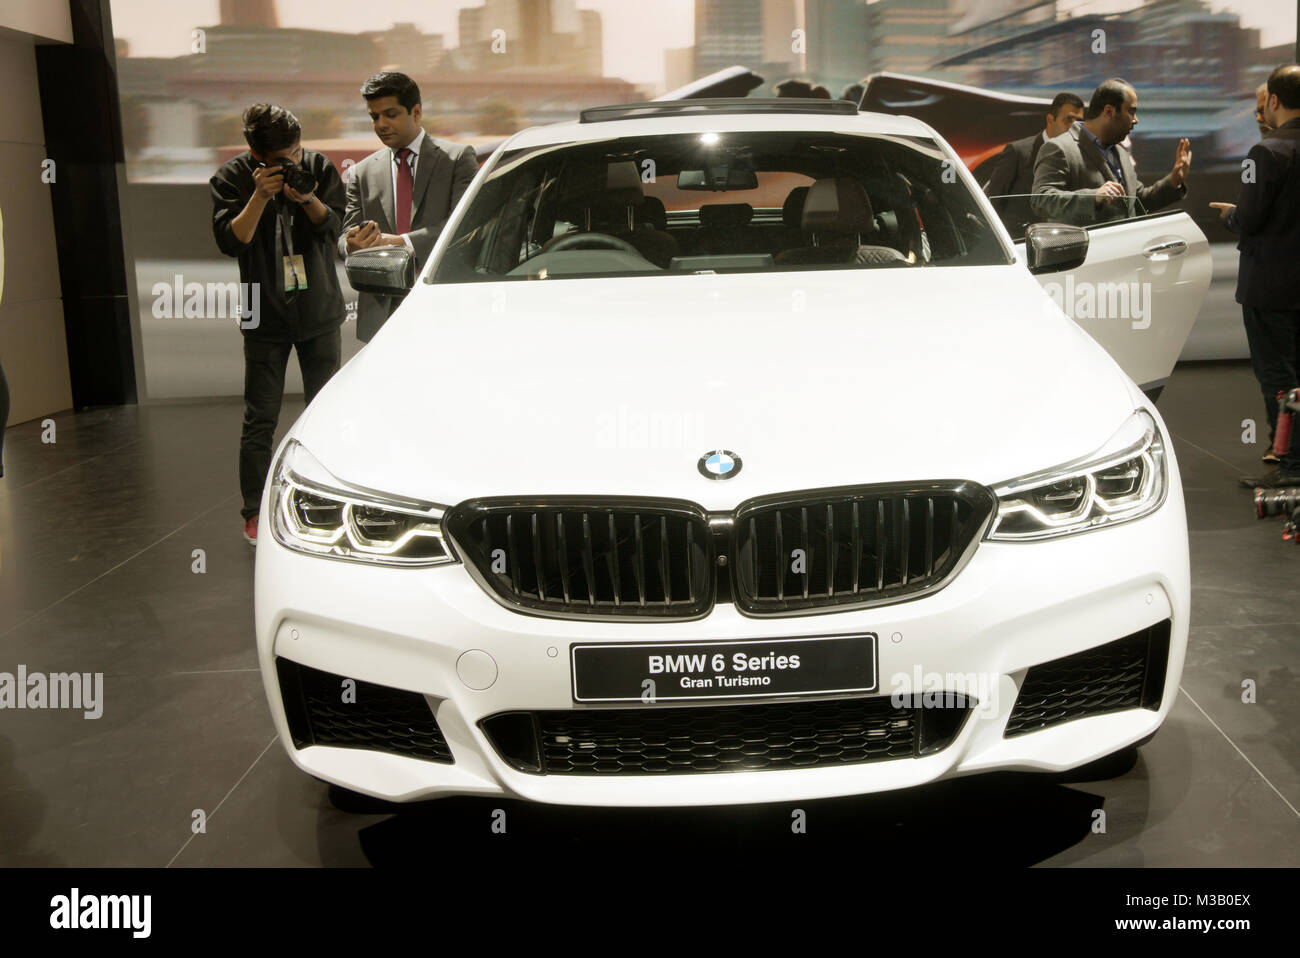 Greater Noida, India. 9th February 2018. Visitors find out more about the BMW 6GT M Sport car on display at the Auto Expo 2018 at India Expo Mart in Greater Noida, India. The Auto Expo is a biennial event and is being held during 9th to 14th February 2018. Credit: Karunesh Johri/Alamy Live News. Stock Photo